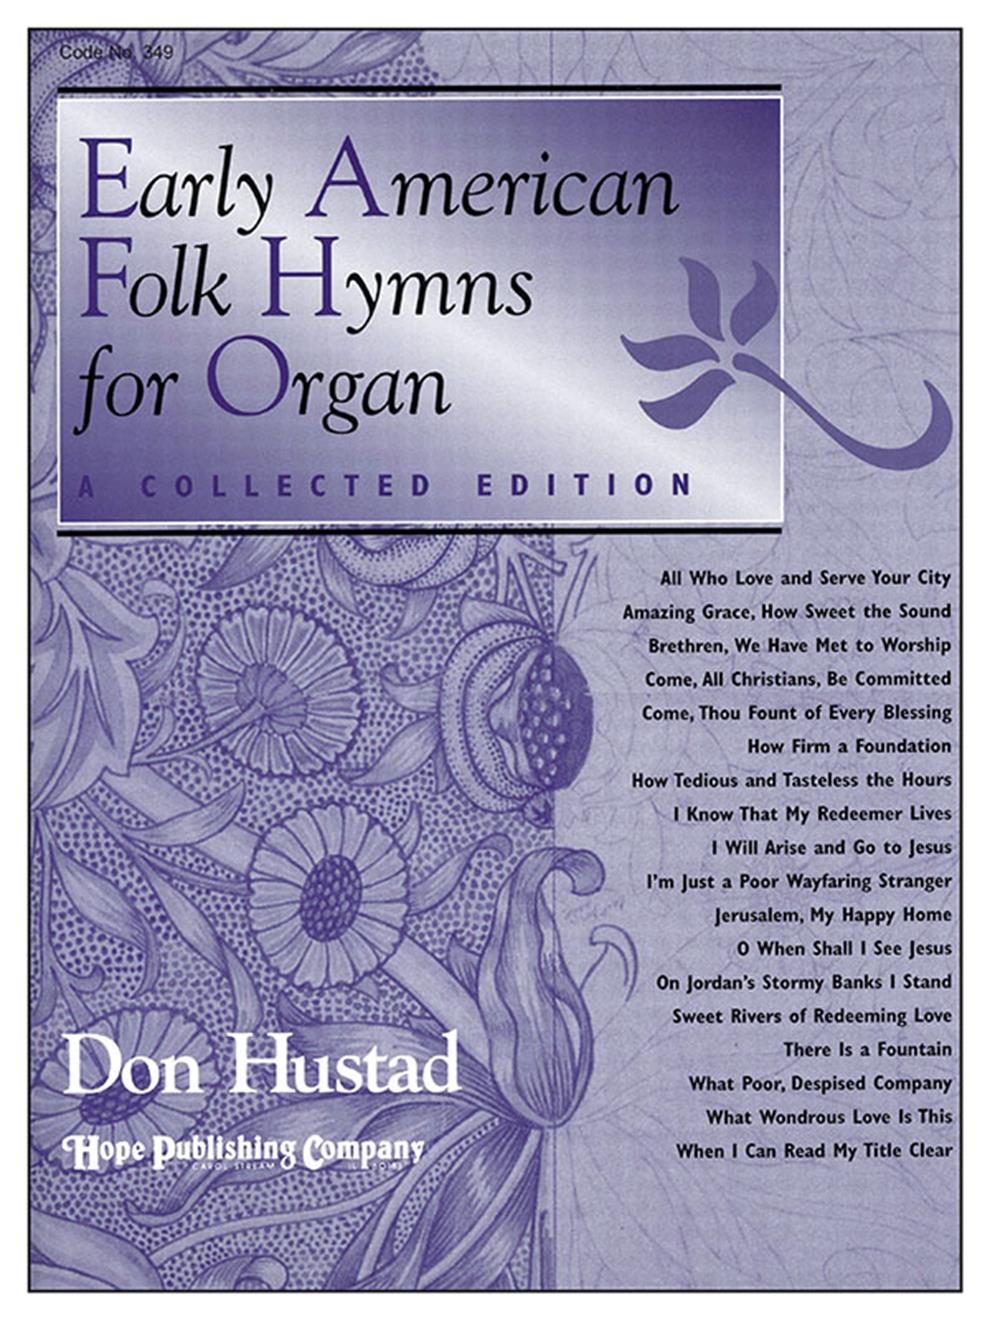 EARLY AMERICAN FOLK HYMNS FOR ORGAN - Cover Image